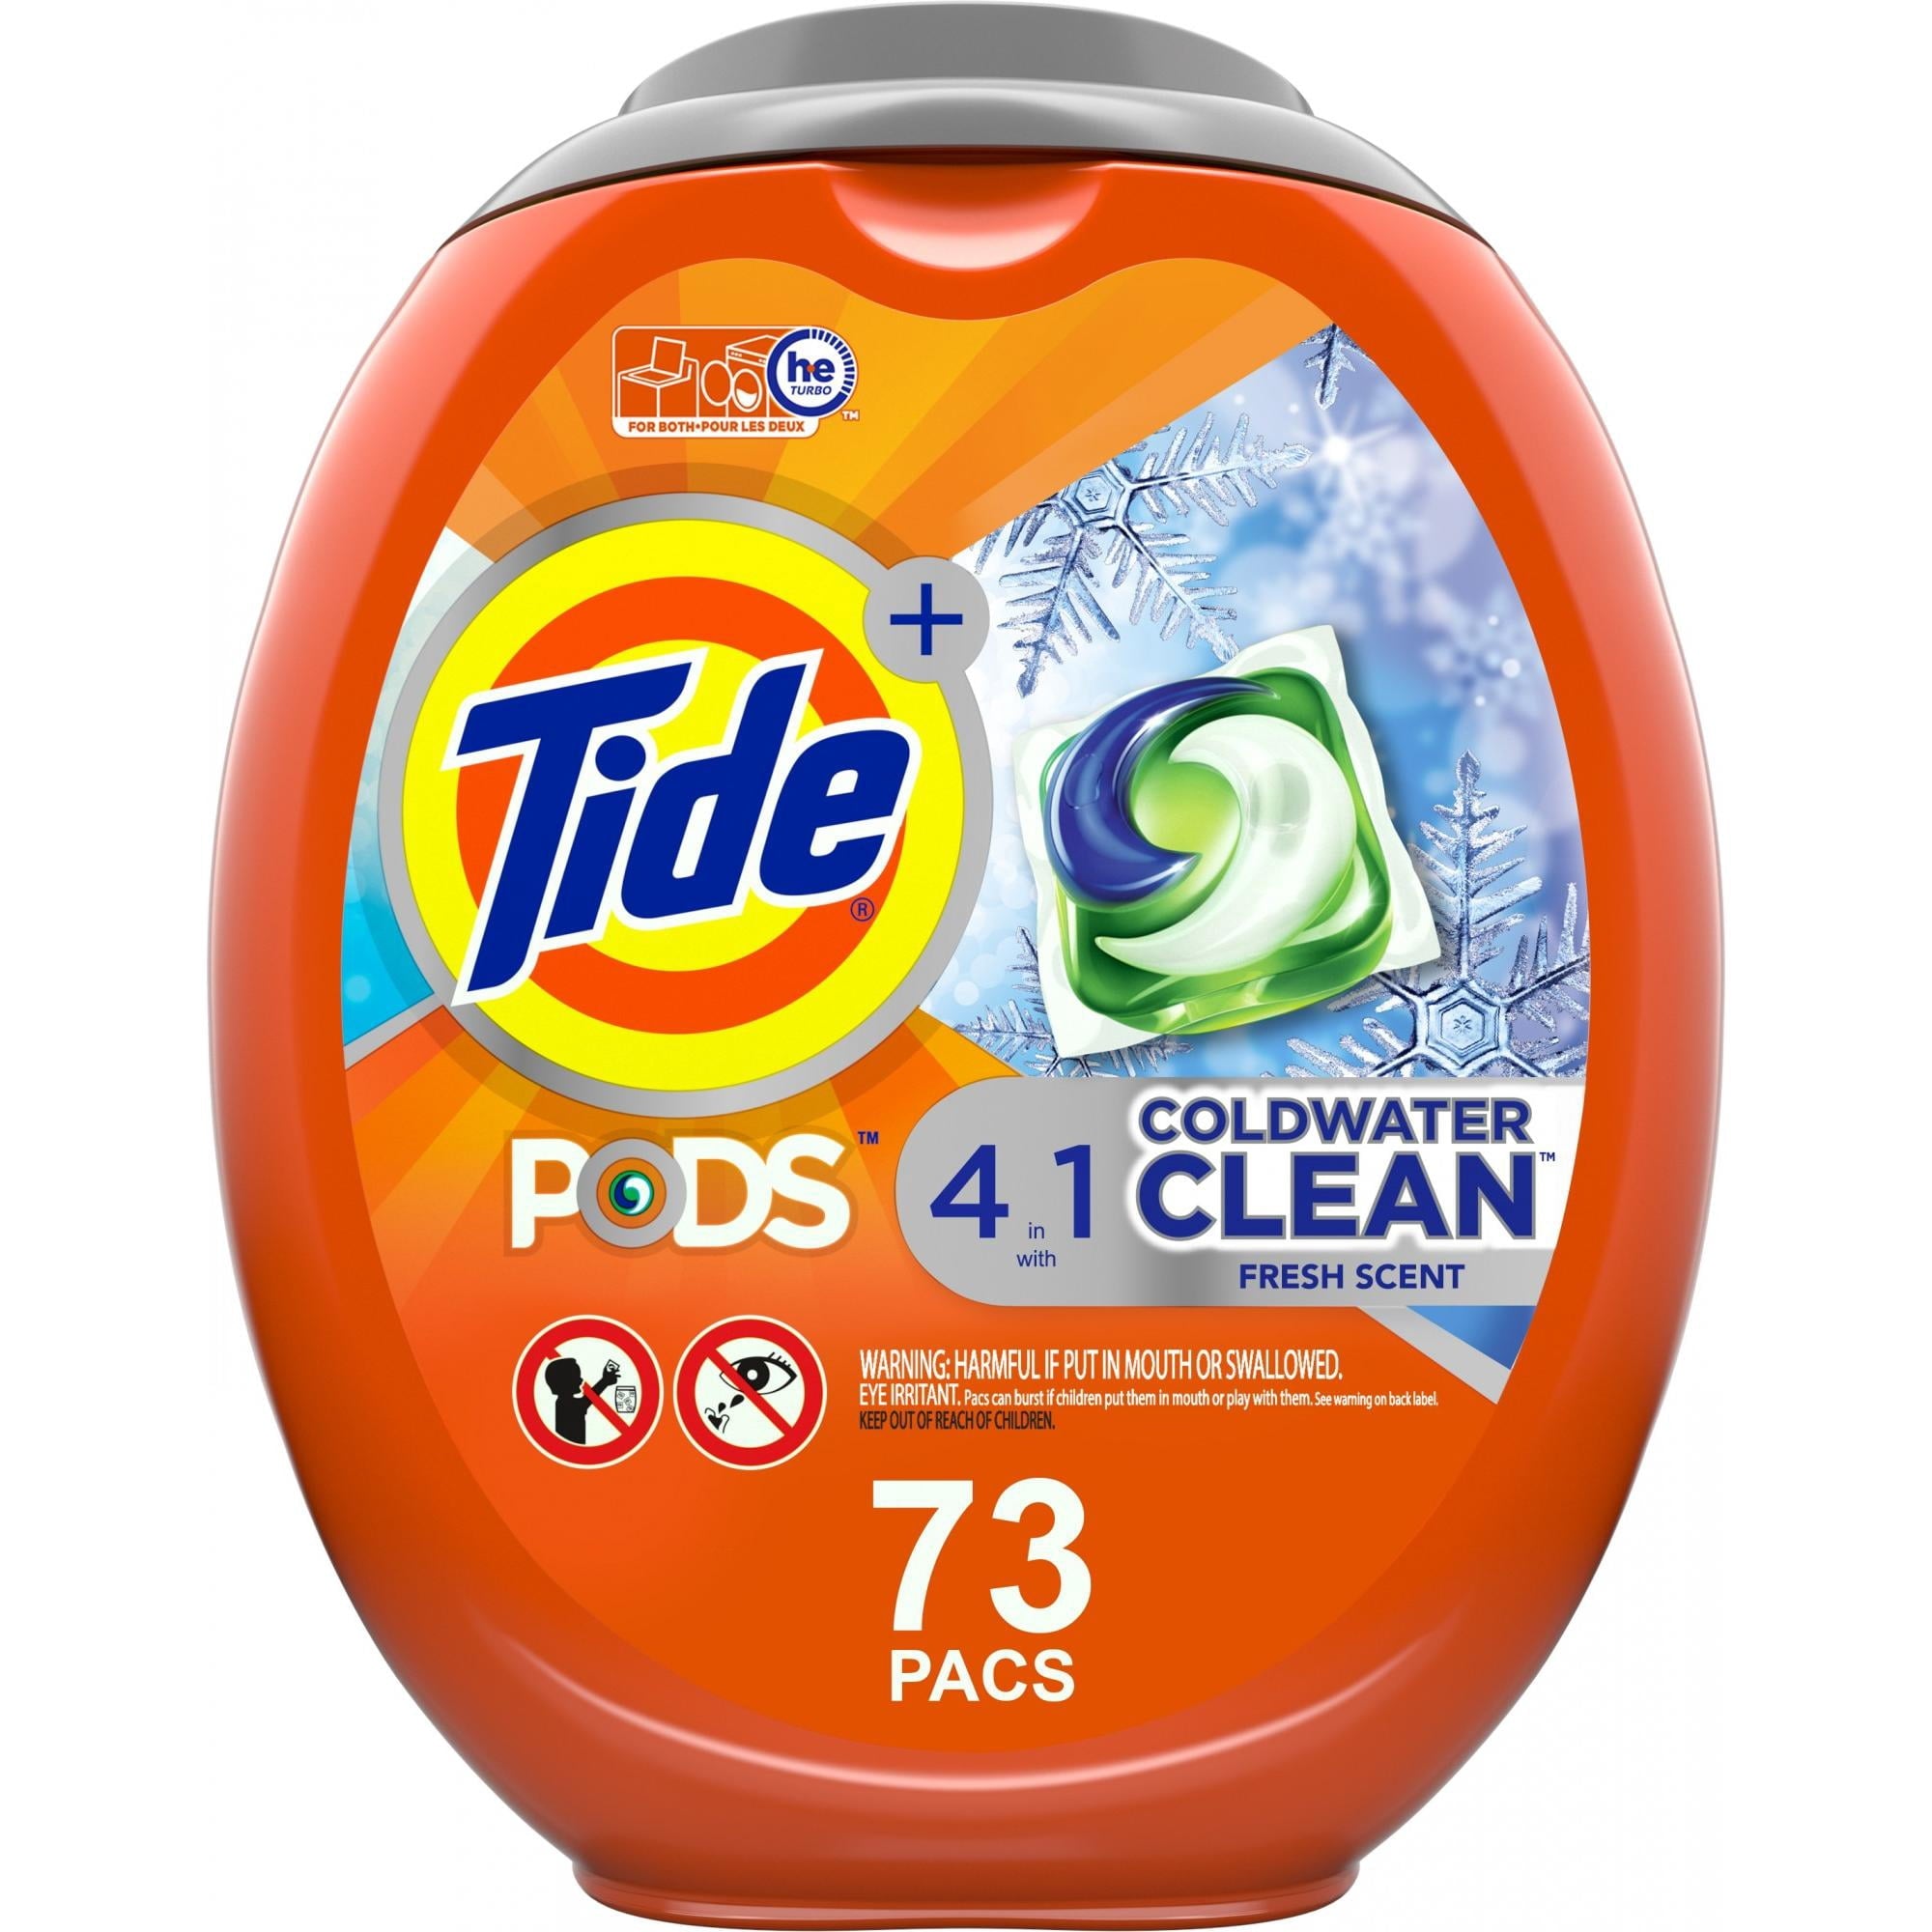 Tide Pods Coldwater Clean 73 Ct, Laundry Detergent Pacs